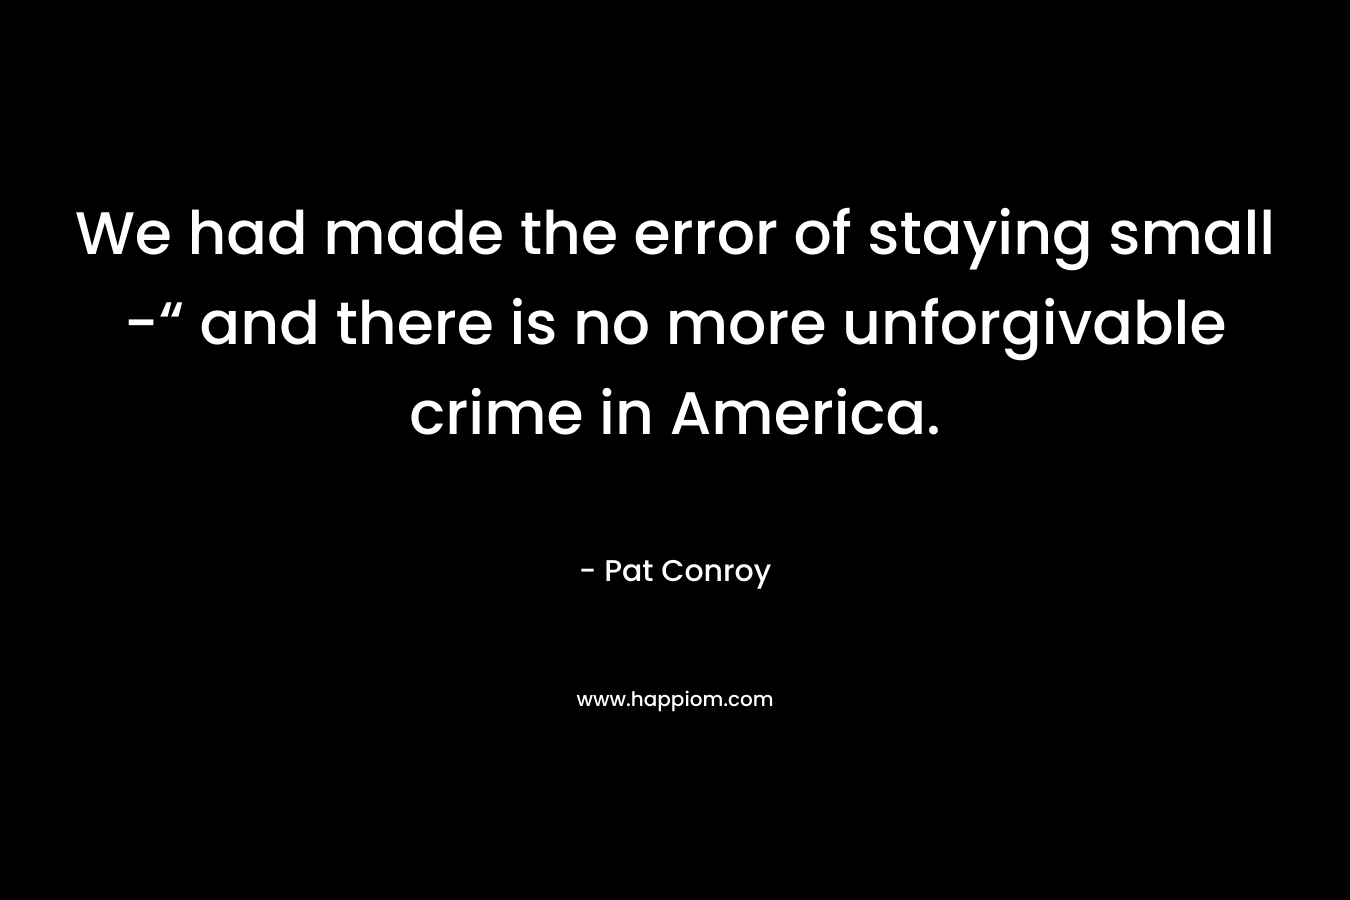 We had made the error of staying small -“ and there is no more unforgivable crime in America. – Pat Conroy